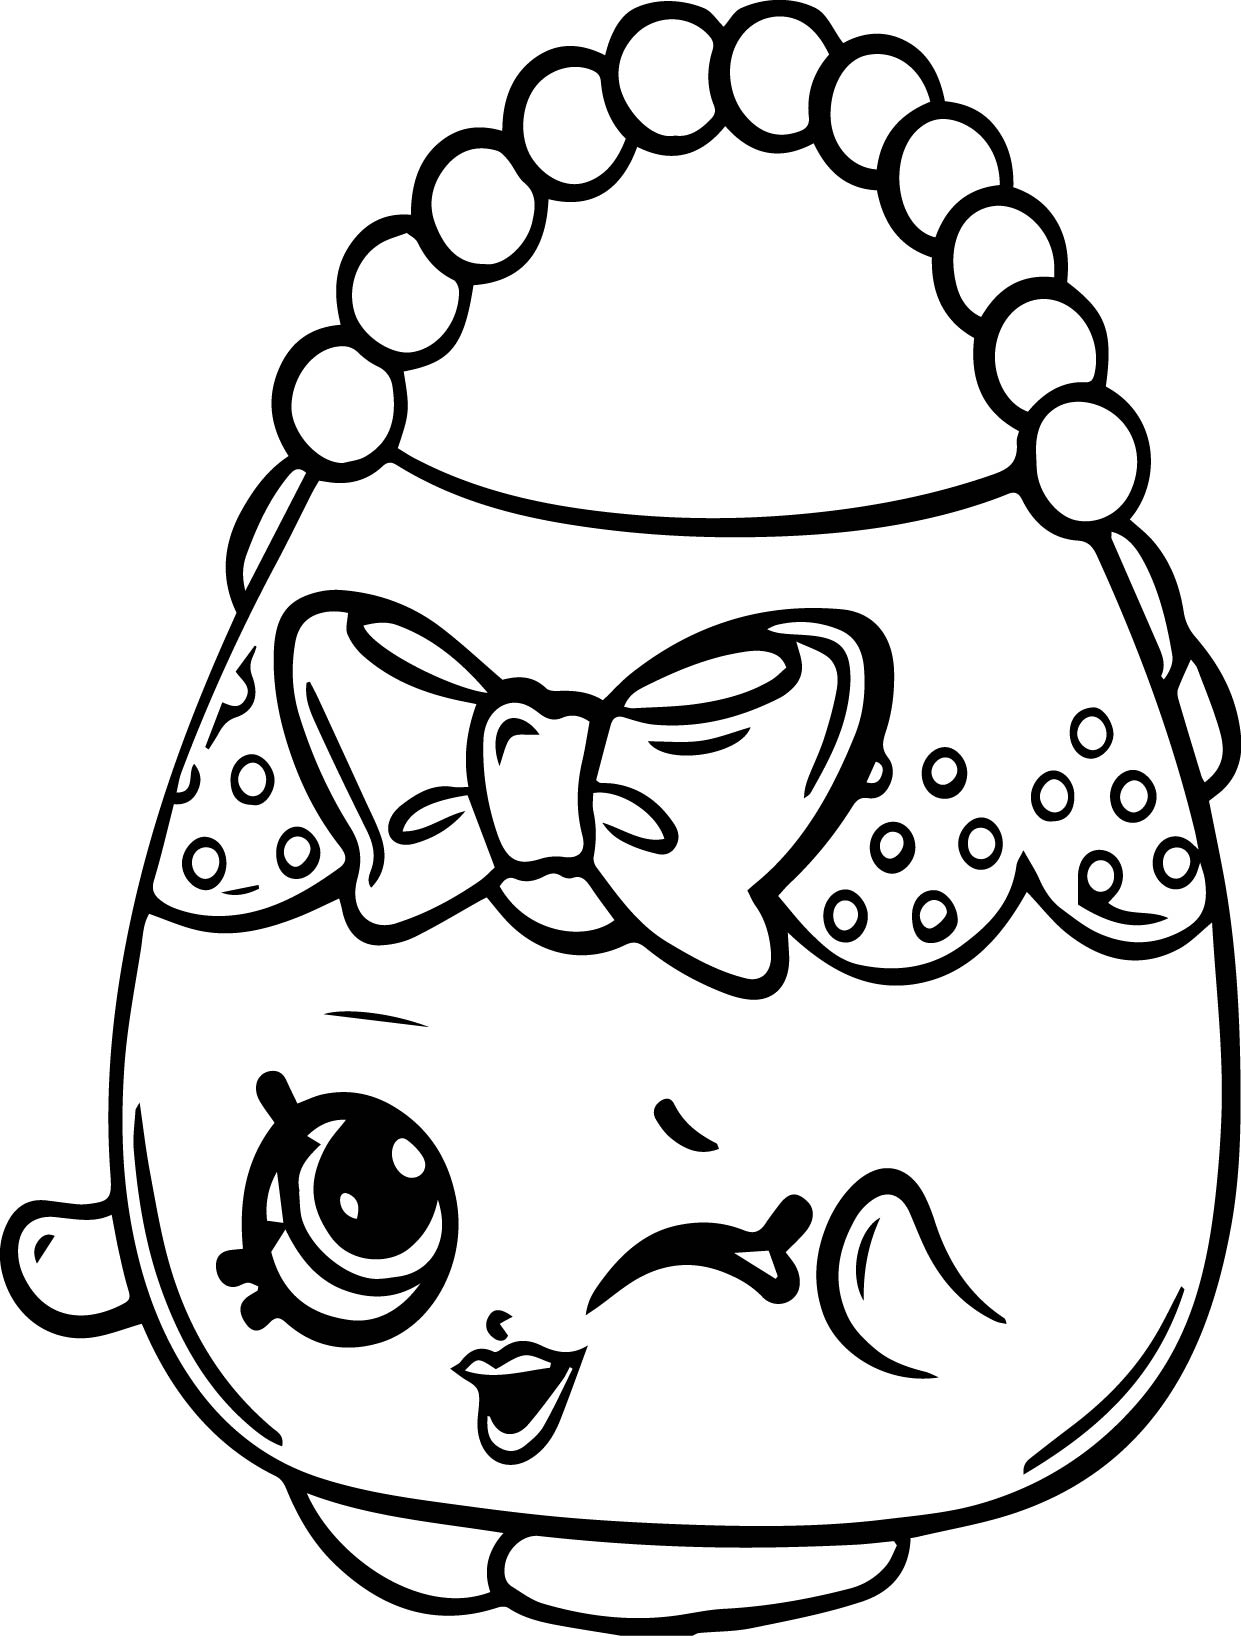 Shopkins Coloring Pages For Kids at GetColorings.com | Free printable